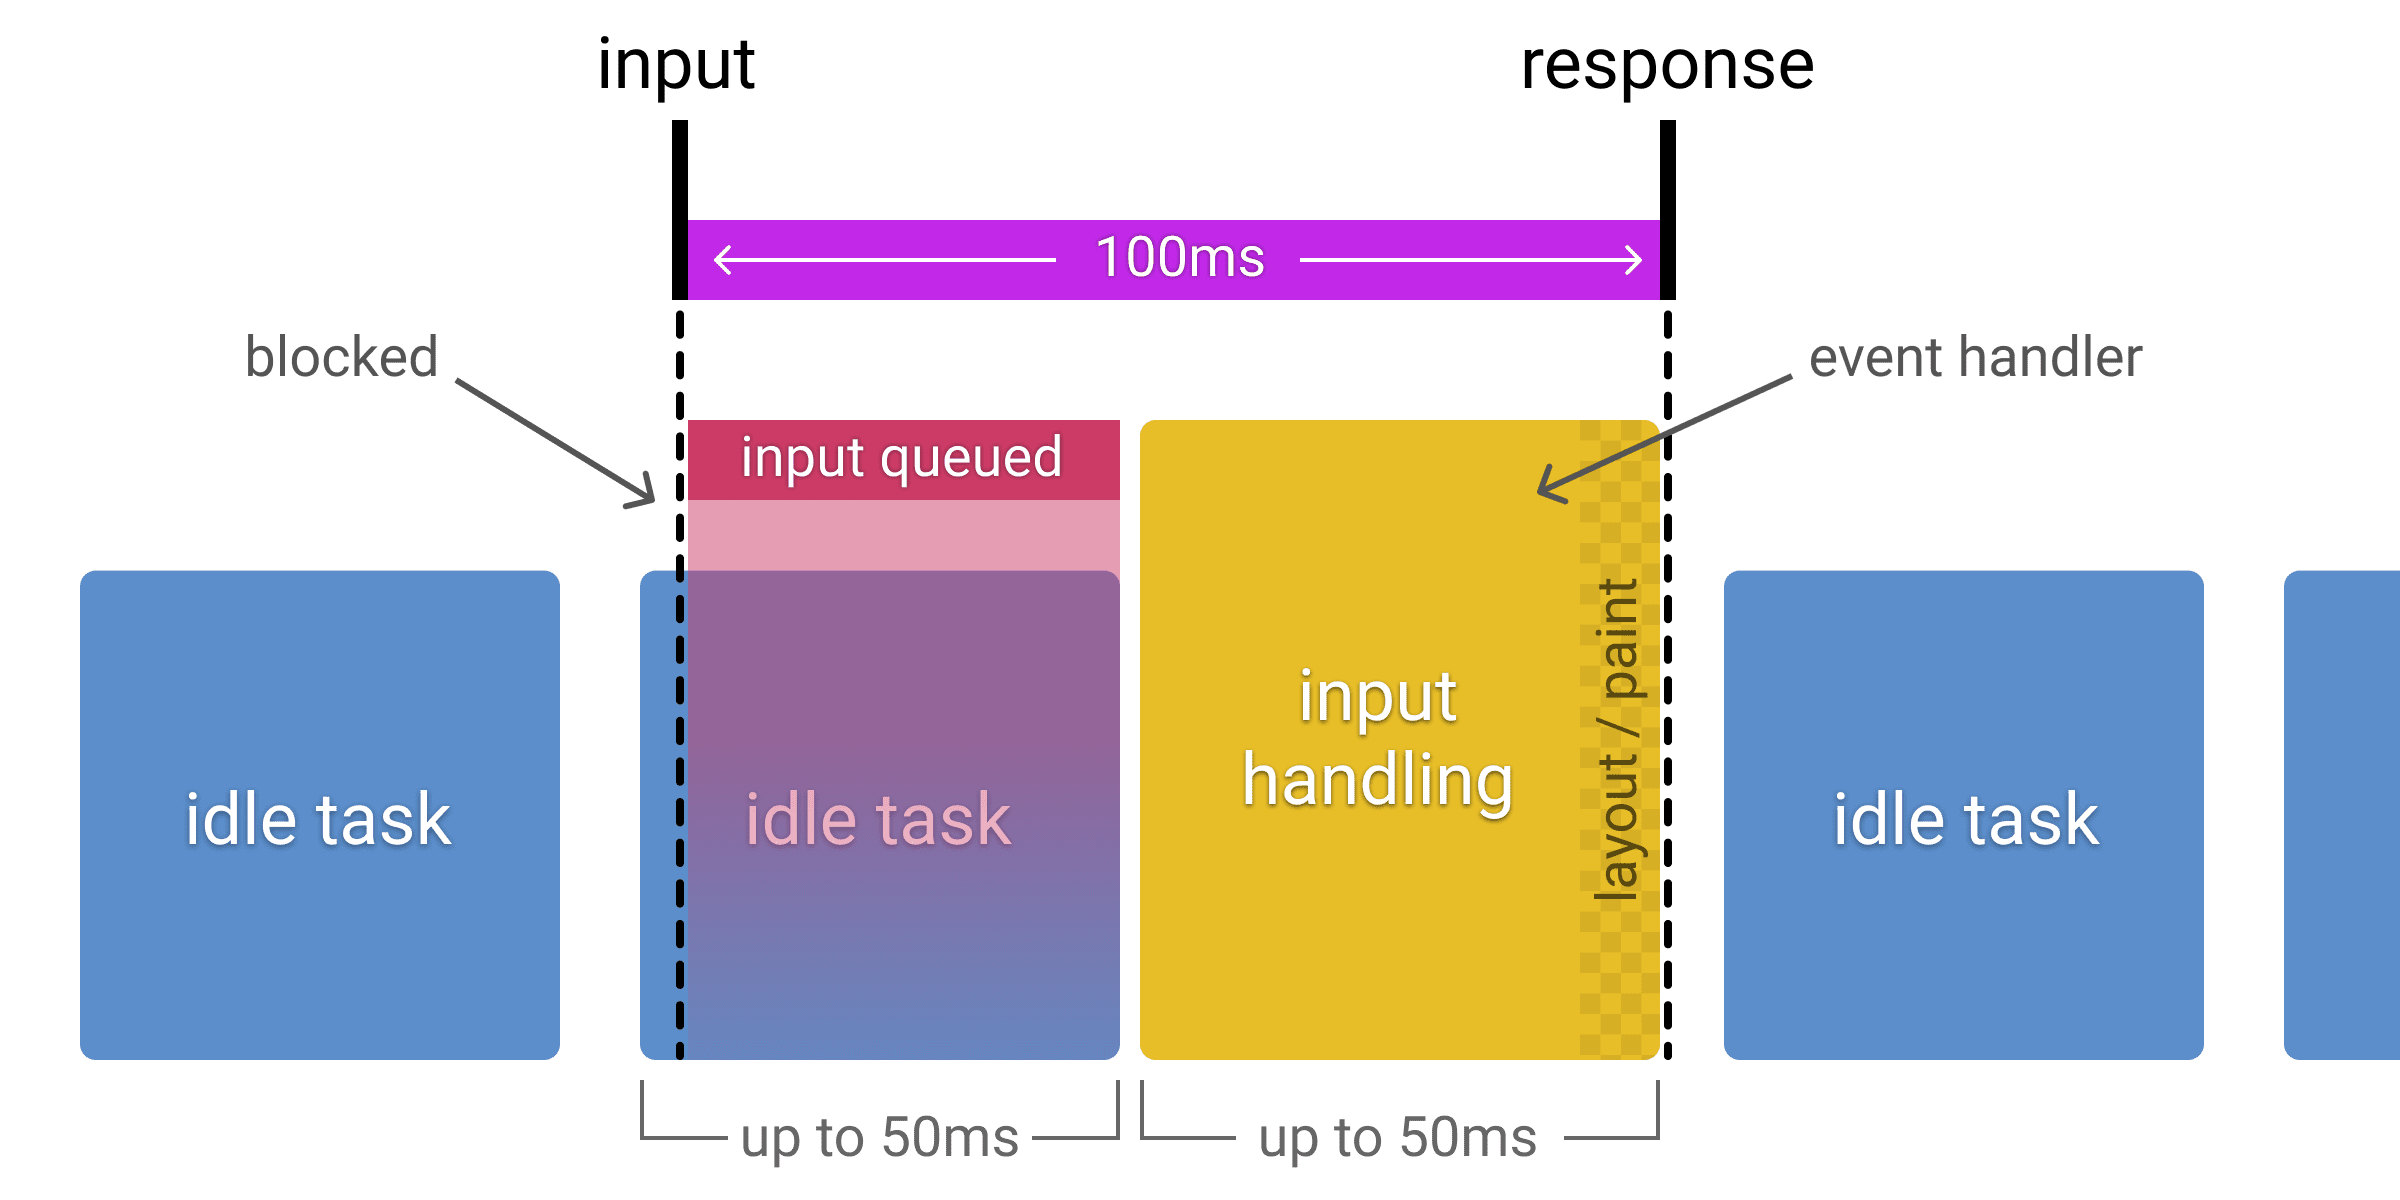 Diagram showing how input received during an idle task is queued, reducing available input processing time to 50ms